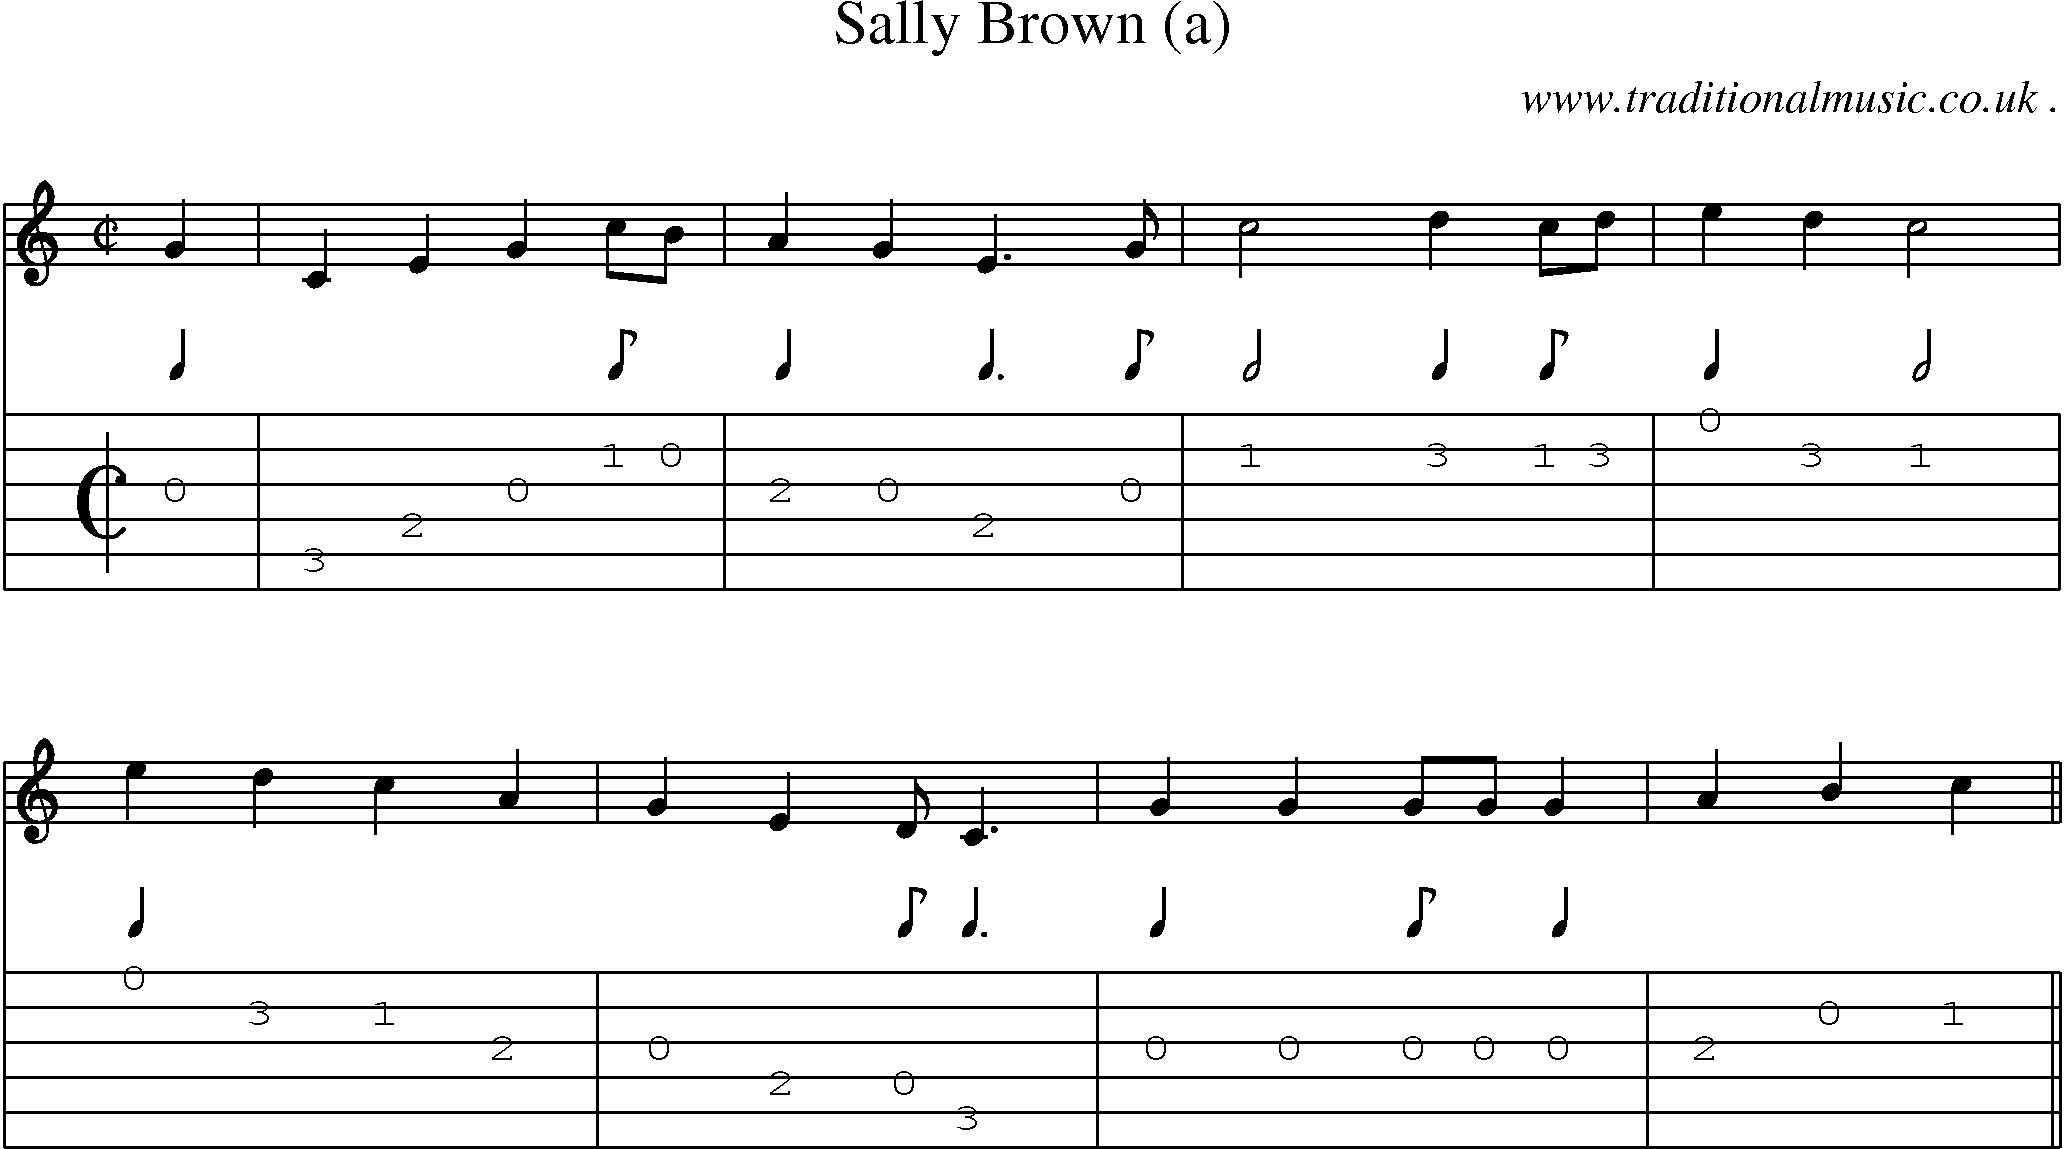 Sheet-Music and Guitar Tabs for Sally Brown (a)